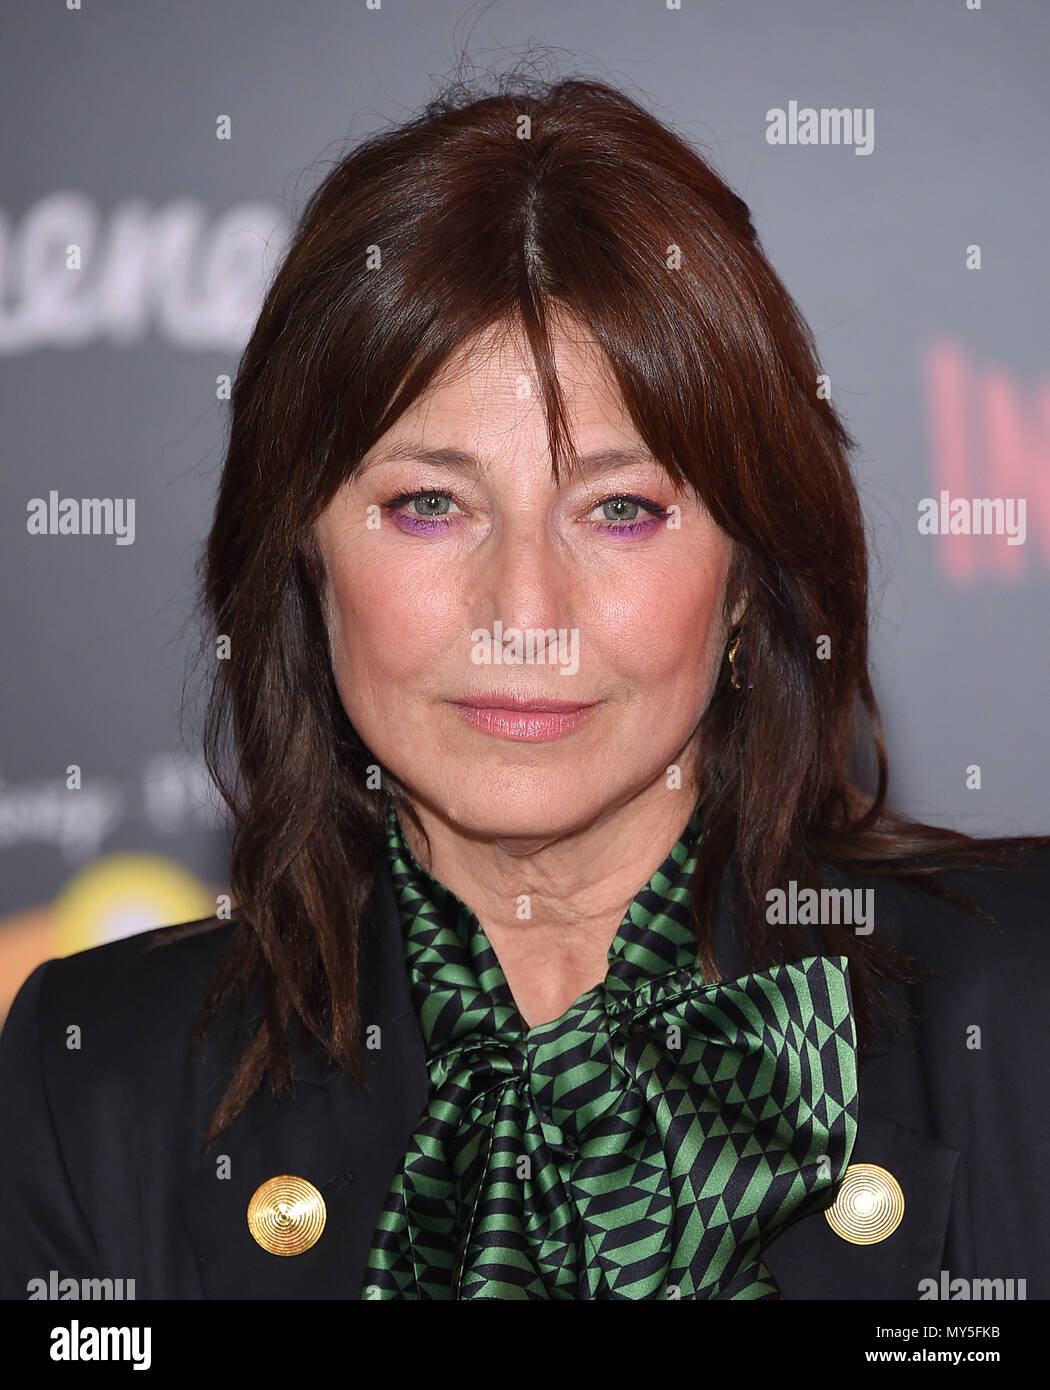 Hollywood, California, USA. 5th June, 2018. Catherine Keener arrives for the premiere of the film 'Incredibles 2' at the El Capitan theater. Credit: Lisa O'Connor/ZUMA Wire/Alamy Live News Stock Photo